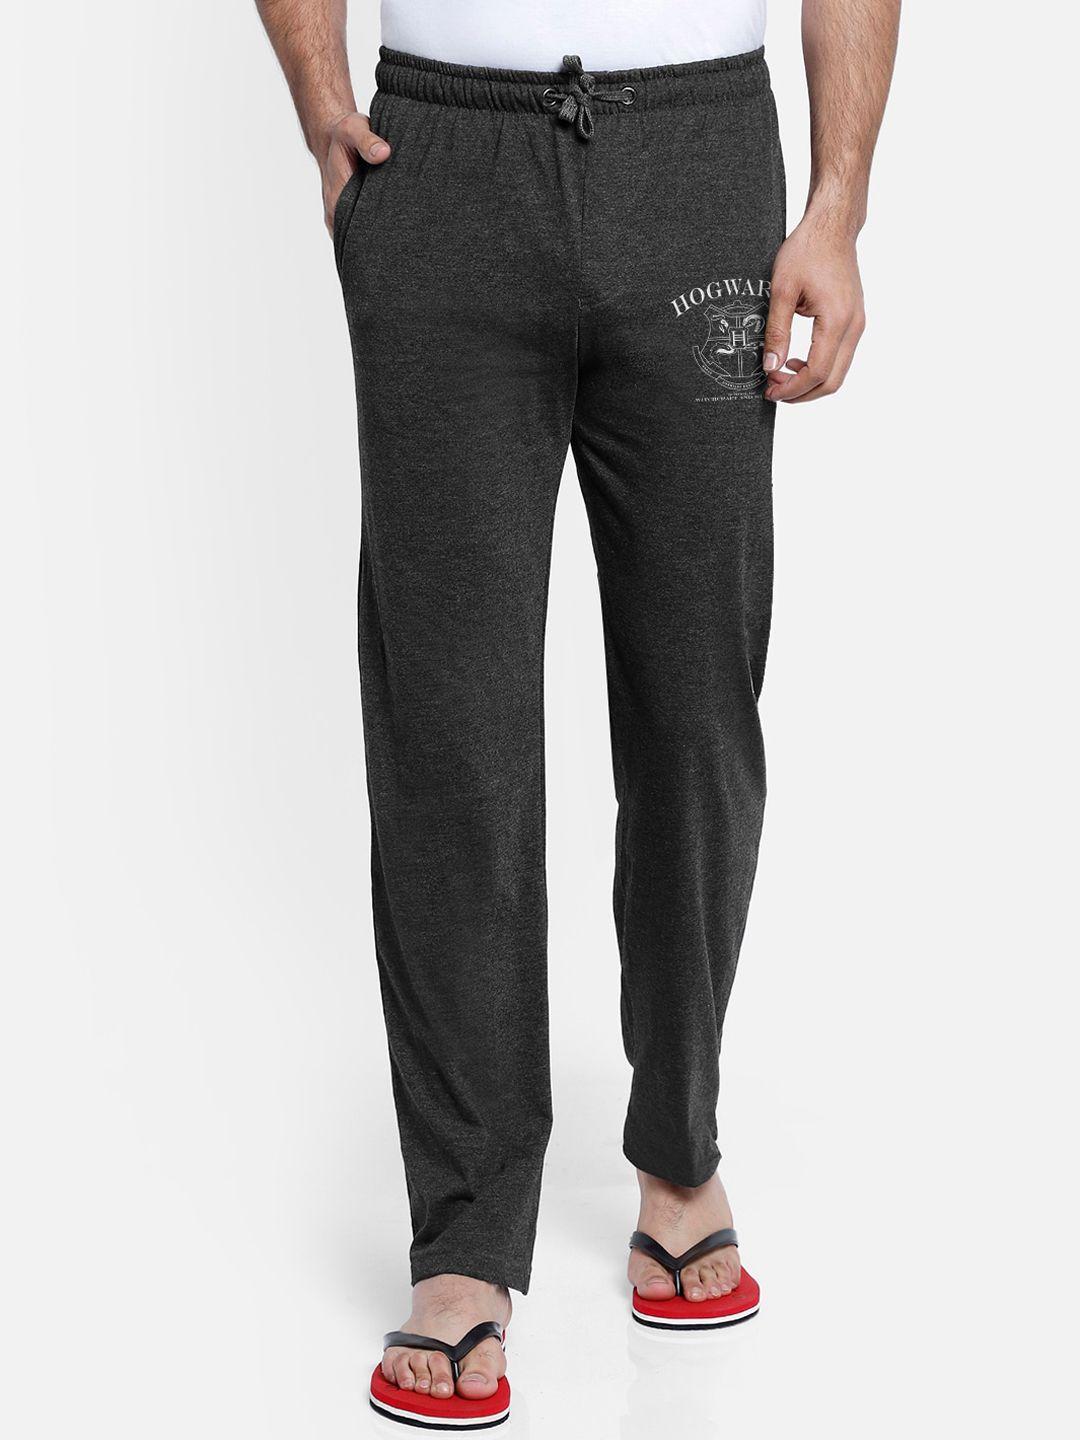 free authority men grey harry potter featured lounge pants